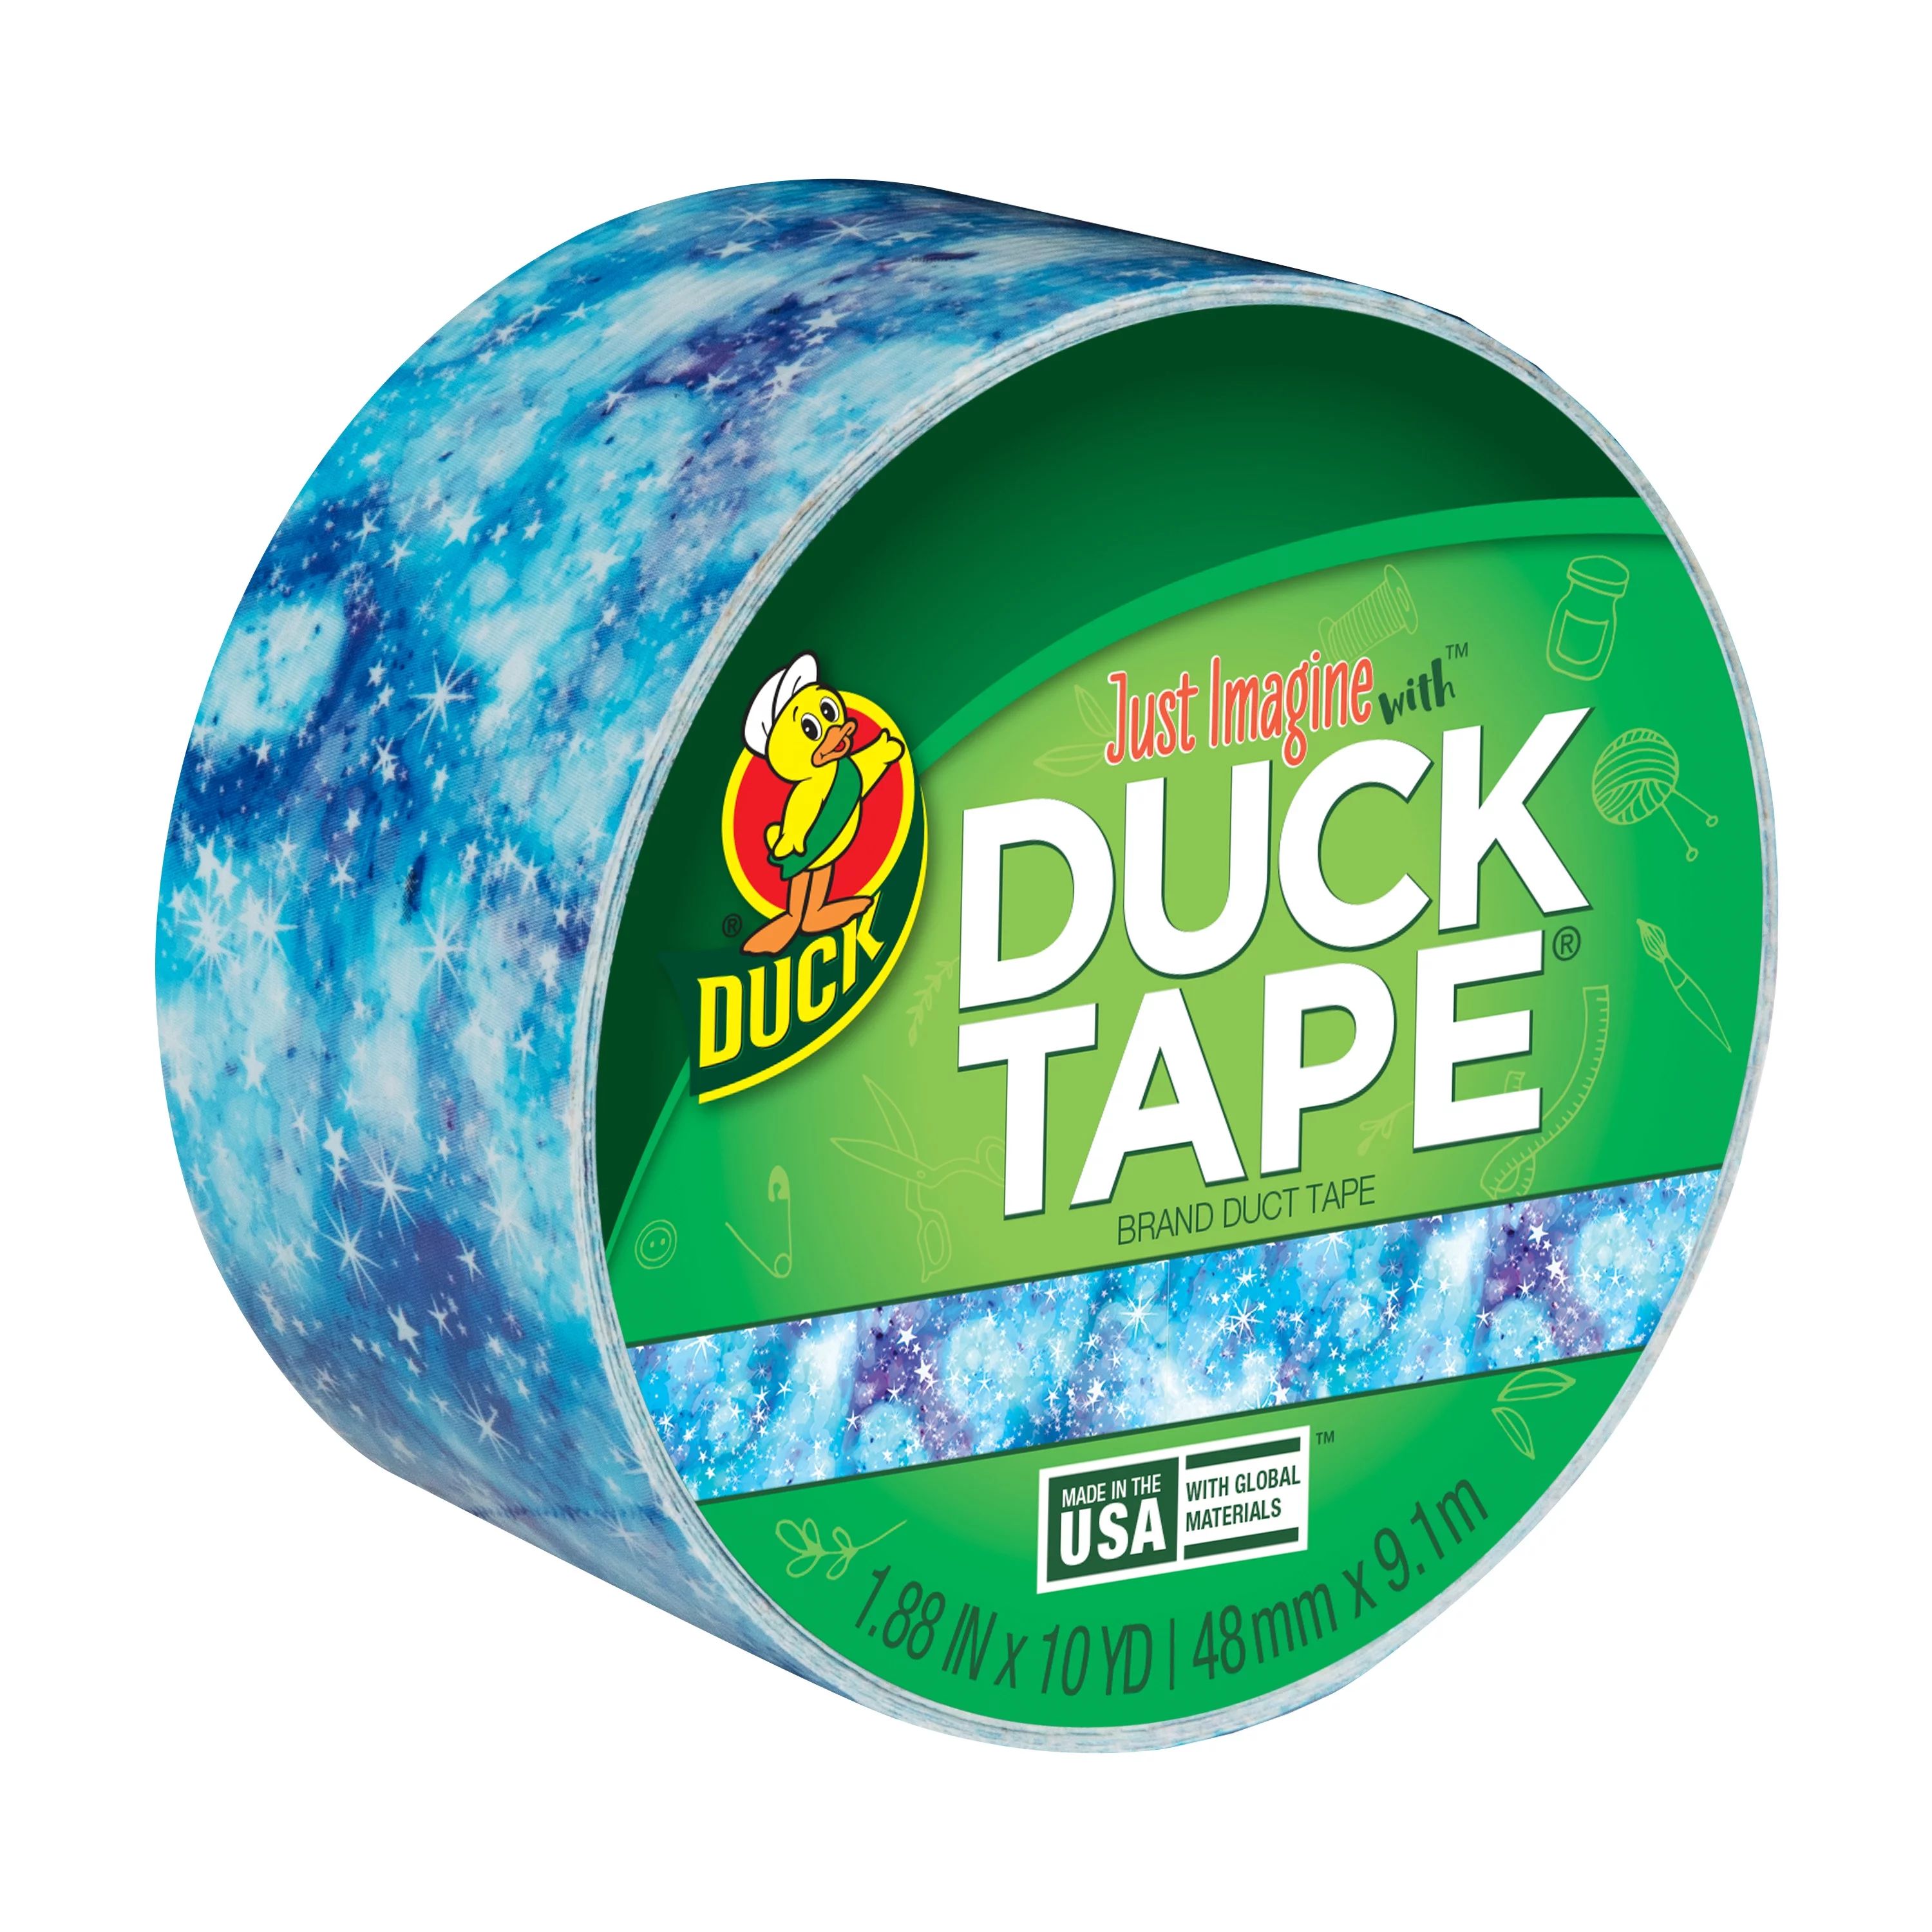 Printed Duck Tape Brand Duct Tape - Starry Galaxy 10 Yards | Walmart (US)